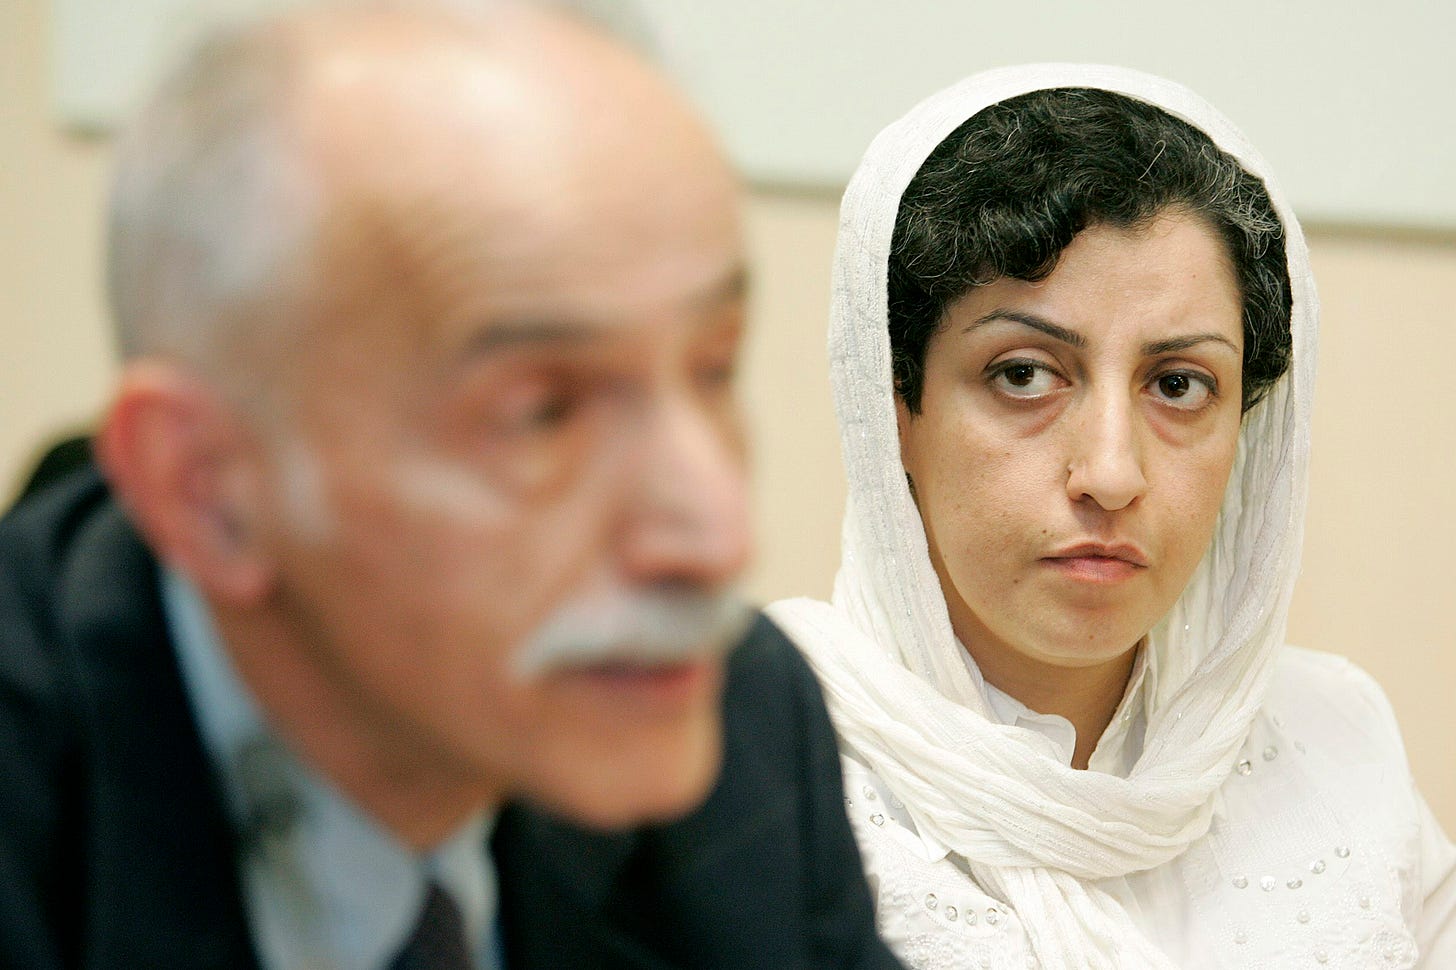 Iranian activist Narges Mohammadi, right, from the center for Human Rights Defenders, listens to Karim Lahidji, president of the Iranian league for the Defence of Human Rights, during a press conference on the Assessment of the Human Rights Situation in Iran, at the UN headquarters in Geneva, Switzerland, on June 9, 2008. The Nobel Peace Prize has been awarded to Narges Mohammadi for fighting oppression of women in Iran.  (Magali Girardin—Keystone via AP)